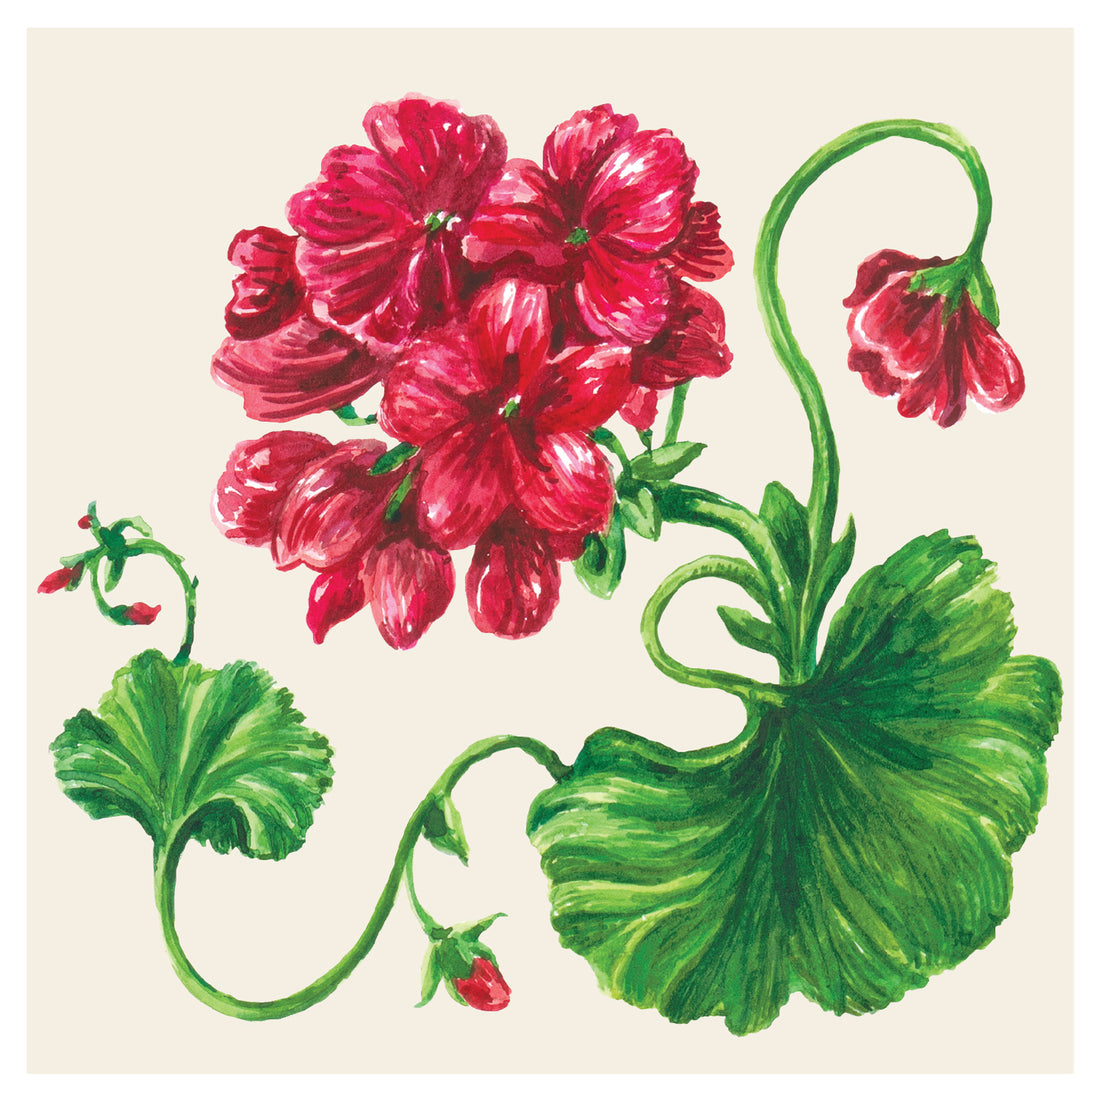 A square, white cocktail napkin featuring illustrated, deep red geranium blooms on vibrant green stems with wide leaves.